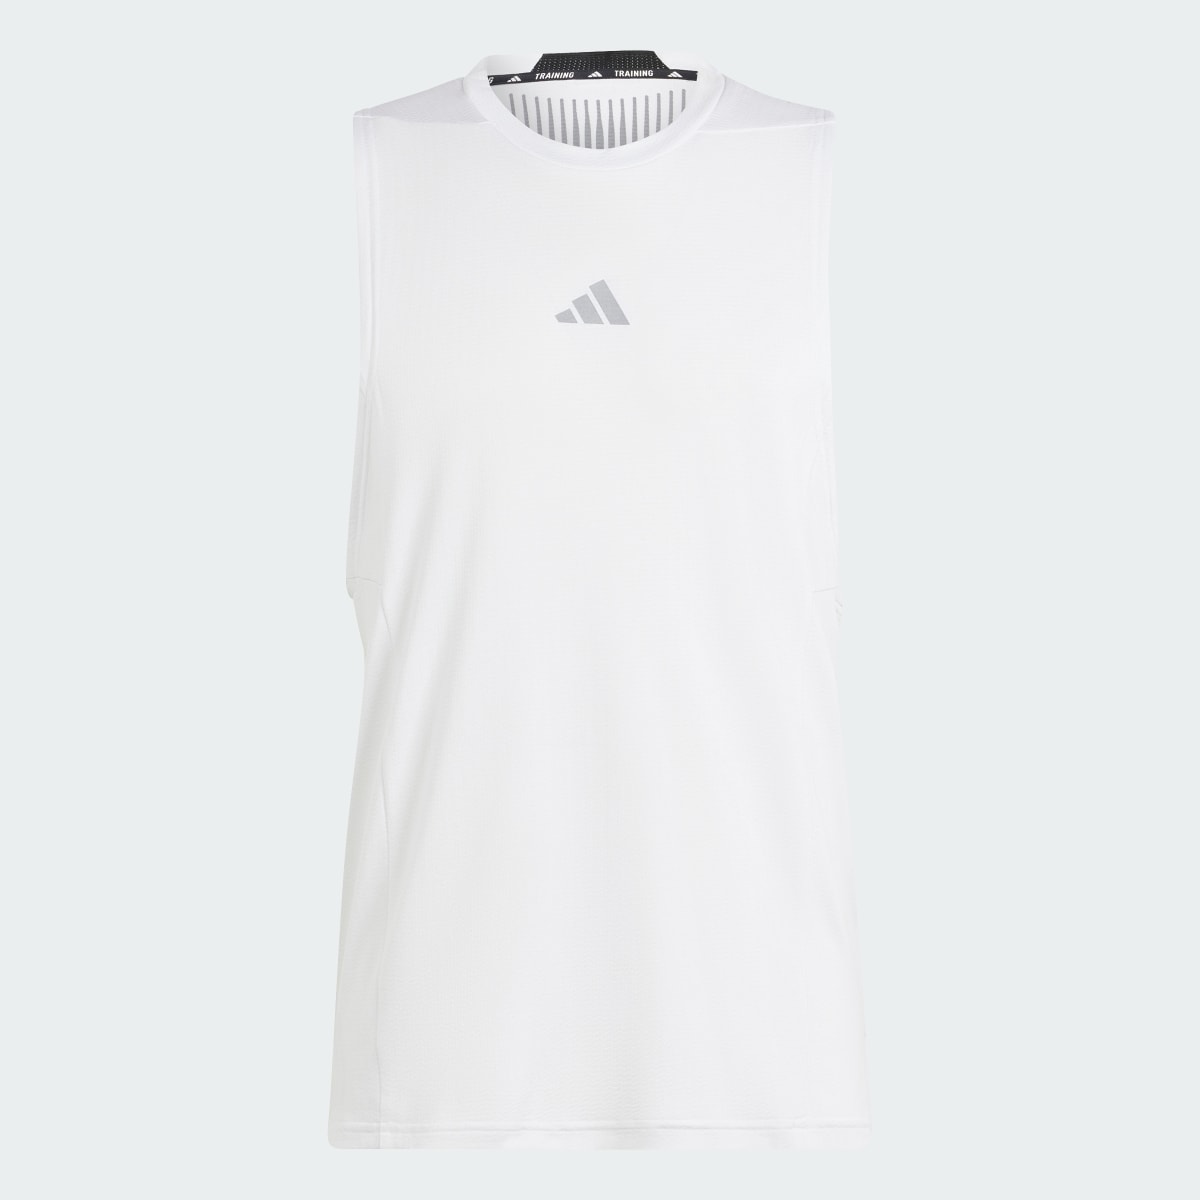 Adidas Designed for Training Workout HEAT.RDY Tank Top. 5